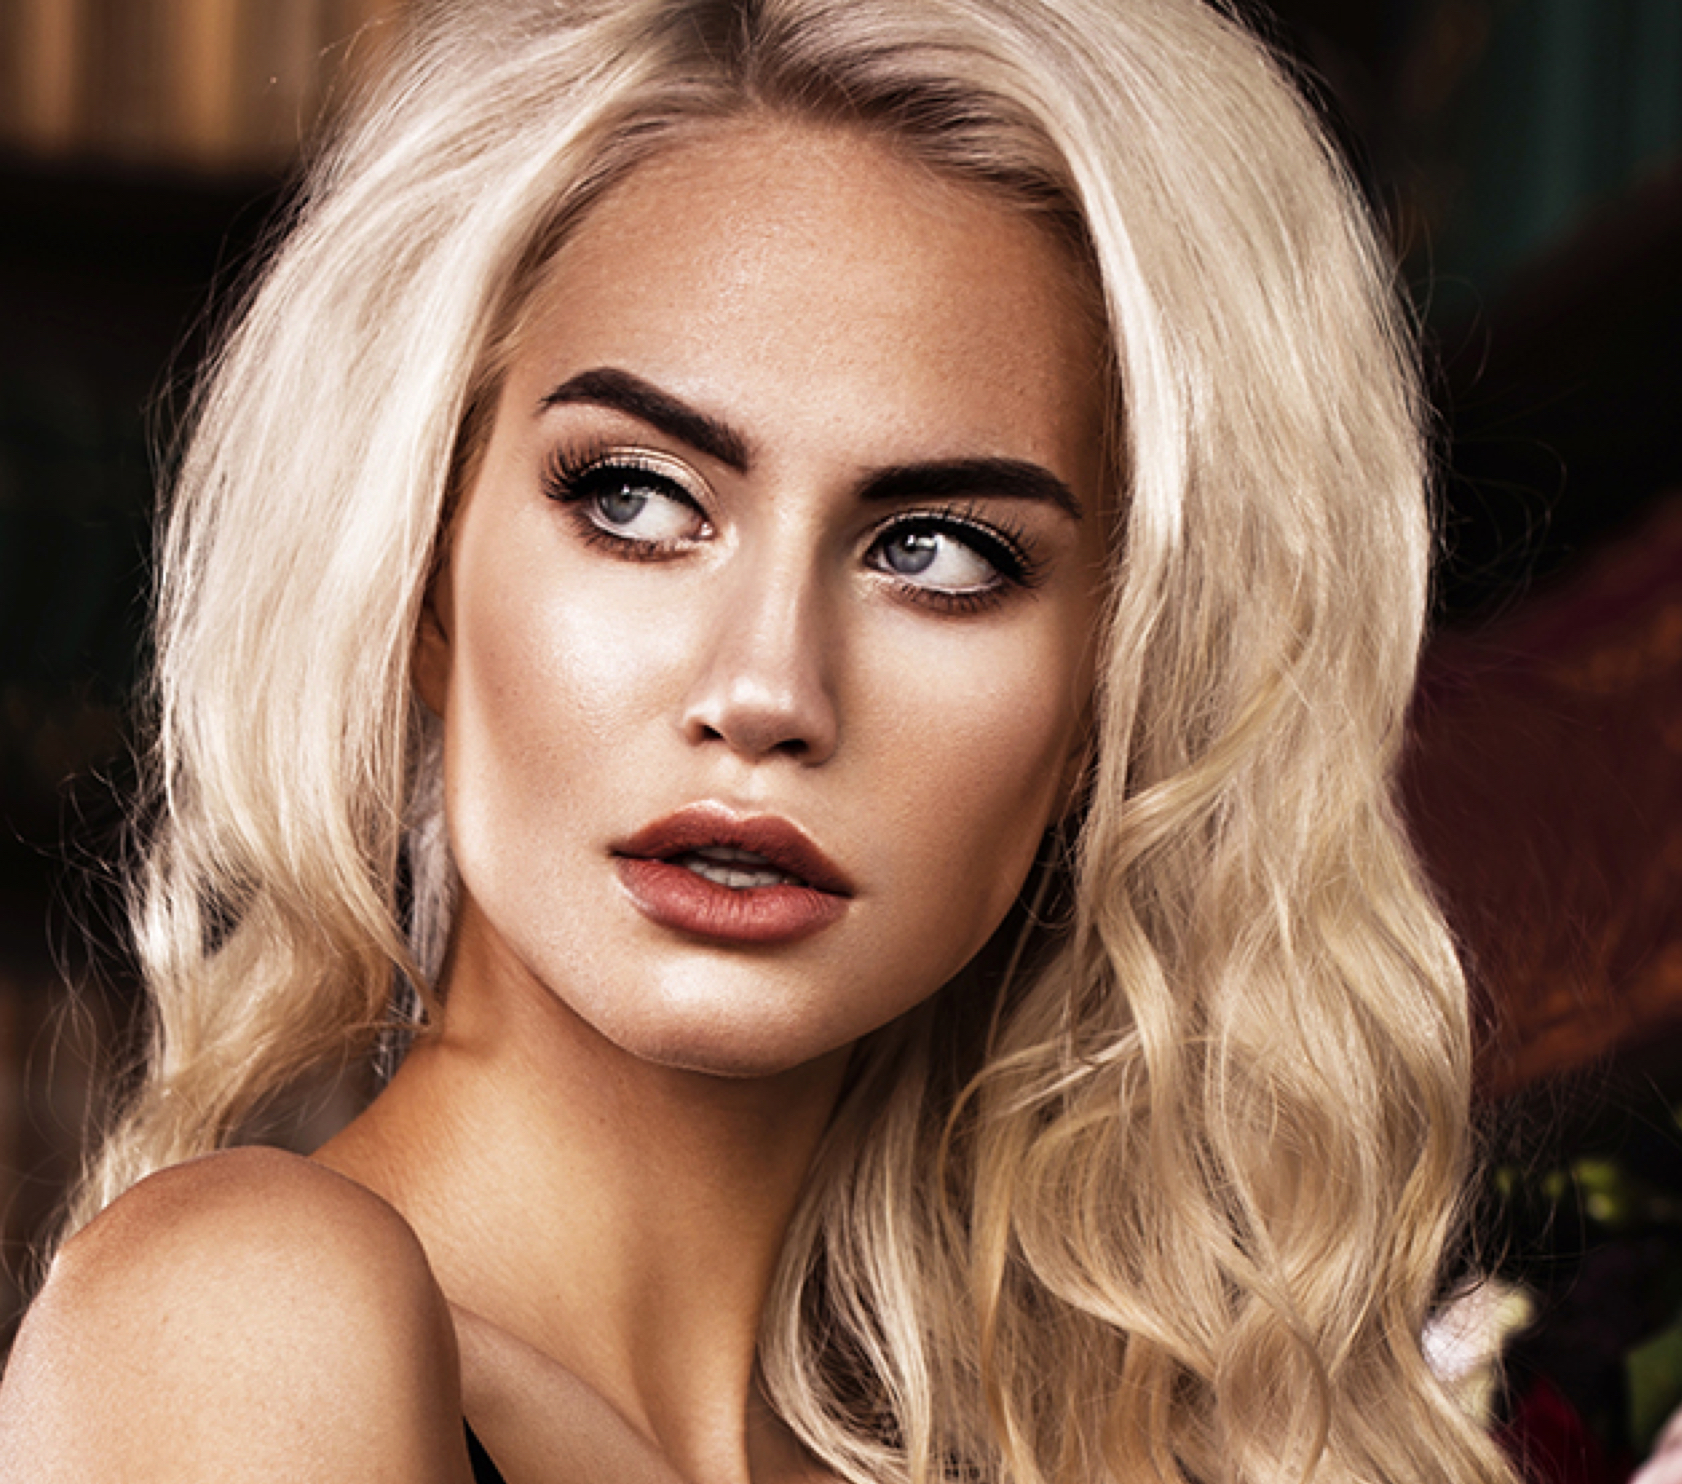 Close up ofa model's face with platinum blonde hair and very nice facial features